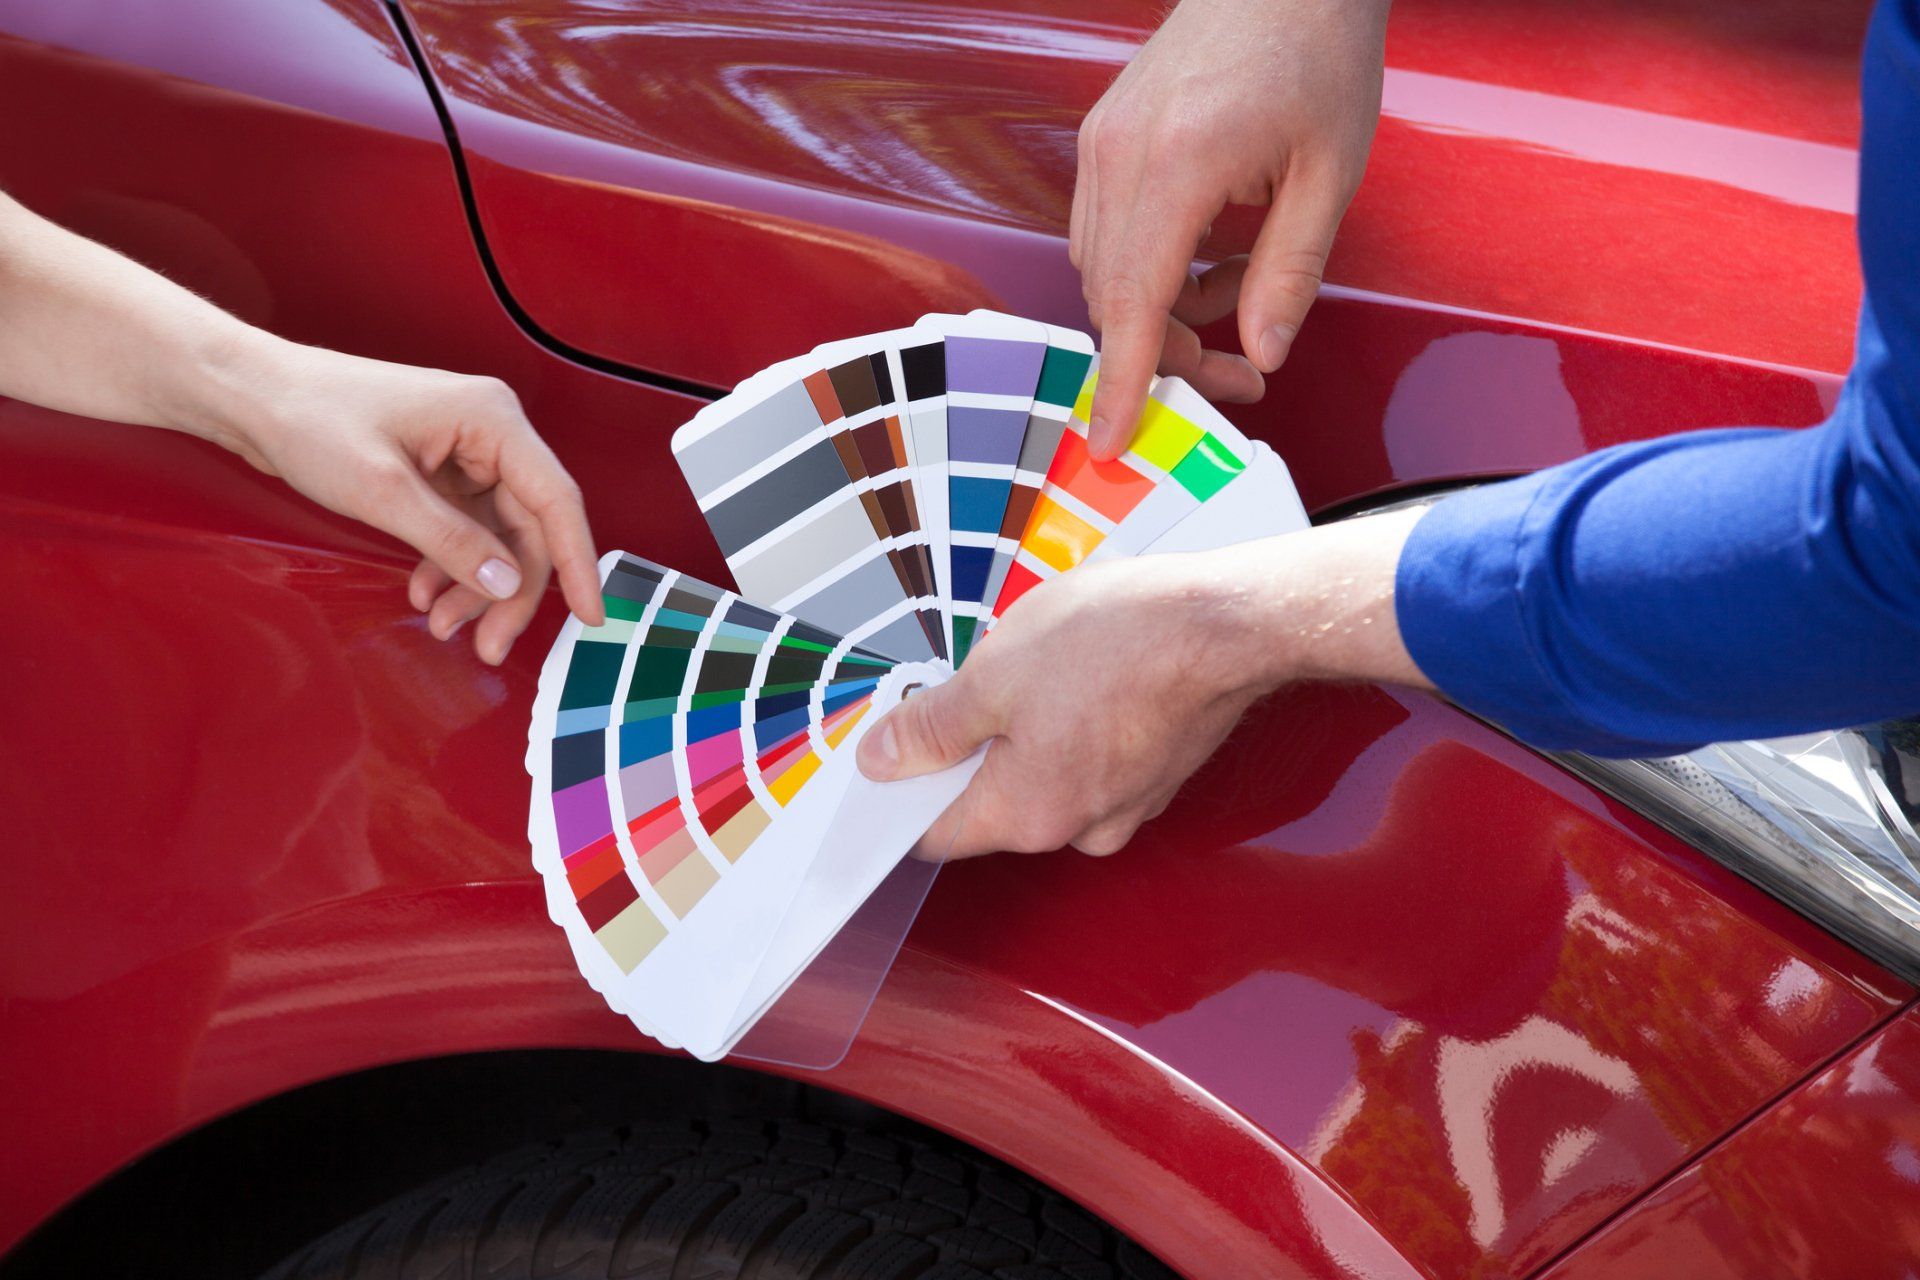 Repaint — Spray Gun With Red Paint Painting a Car in Missoula, MT